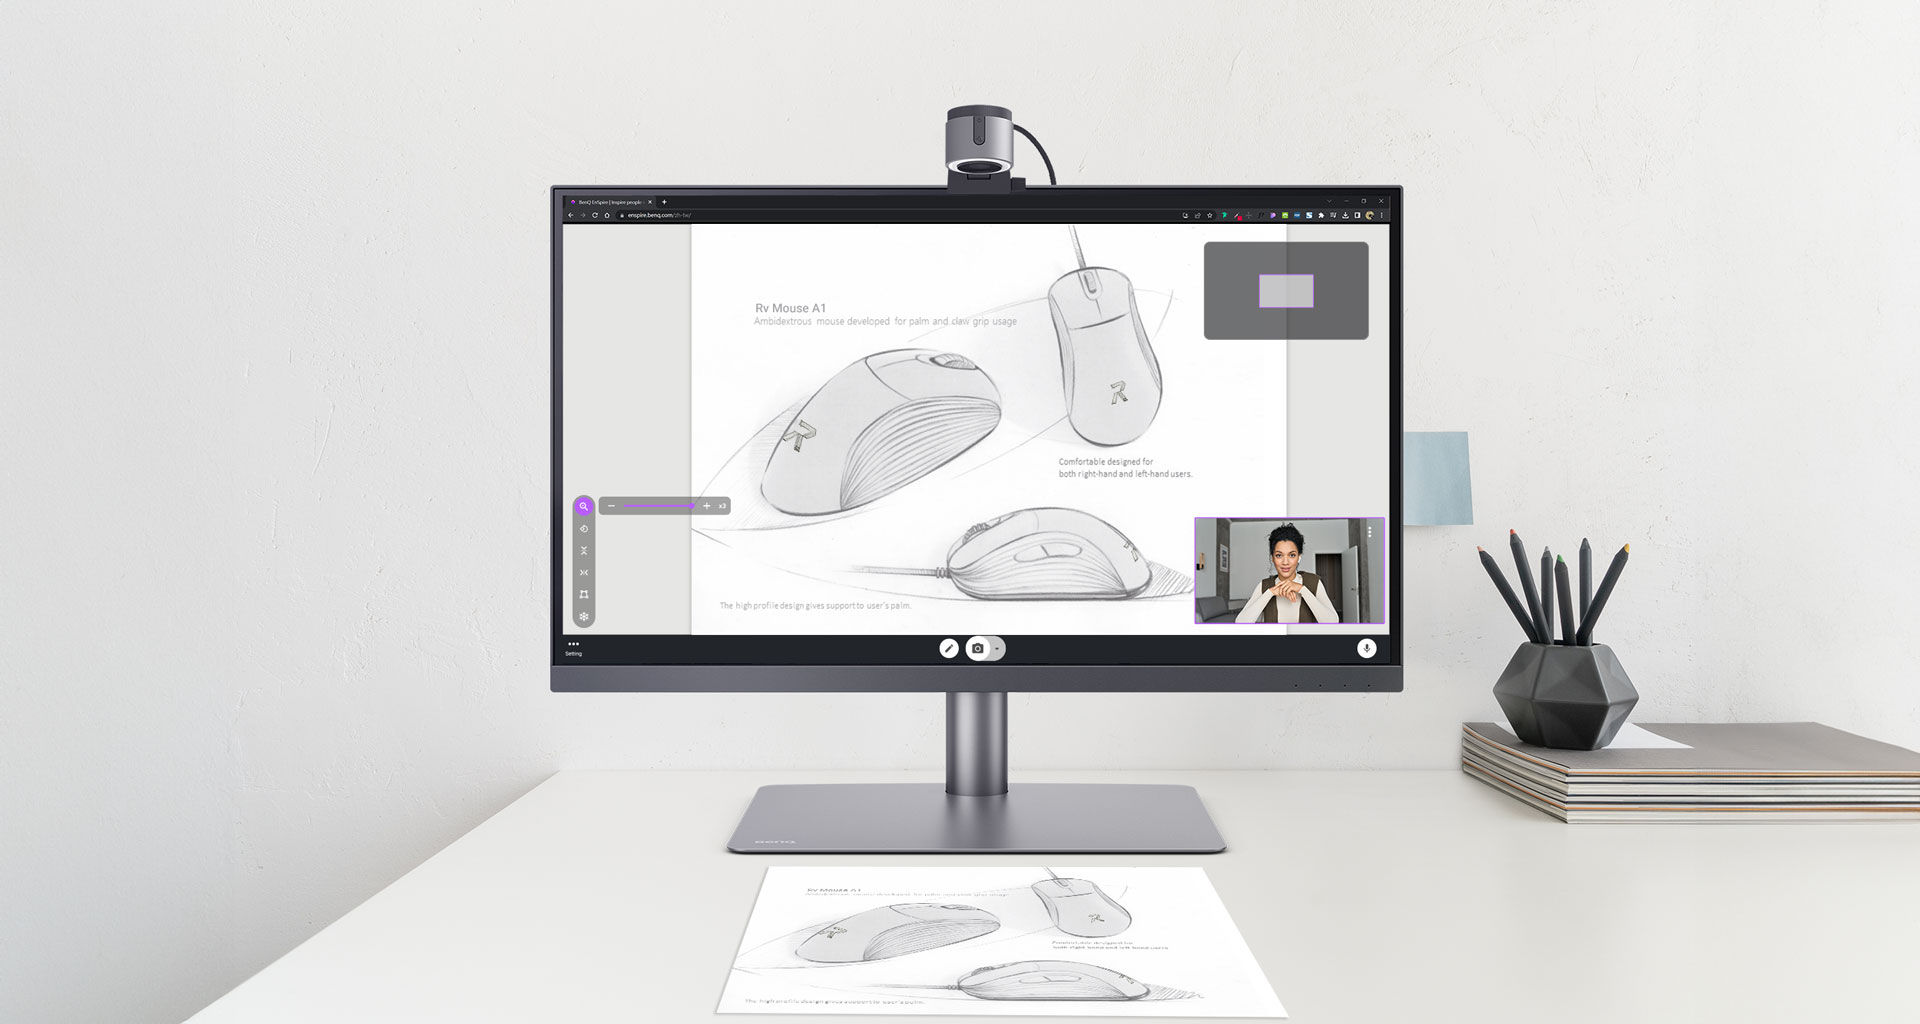 With ideaCam's multiple shooting modes and high-definition resolution, you can present your ideas clearly and professionally to colleagues and clients. Stay connected and productive with ease, as if you were physically present.